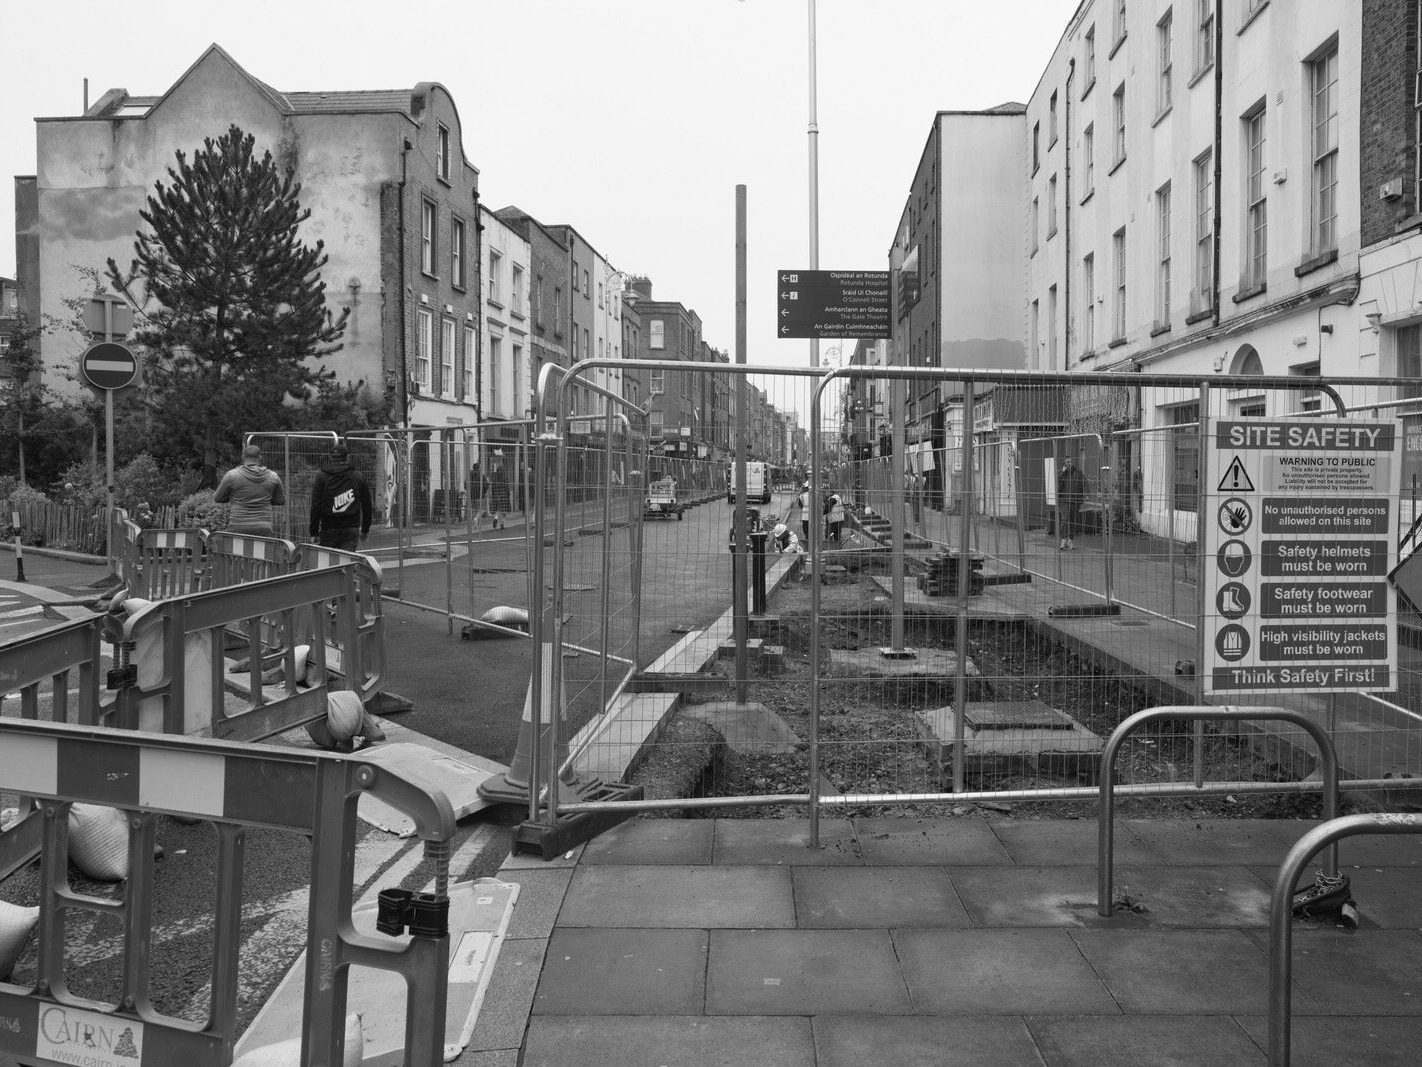 CAPEL STREET ON A DULL WET DAY [INTERIM CAPEL STREET IMPROVEMENT WORKS ARE NOW ONGOING] 003